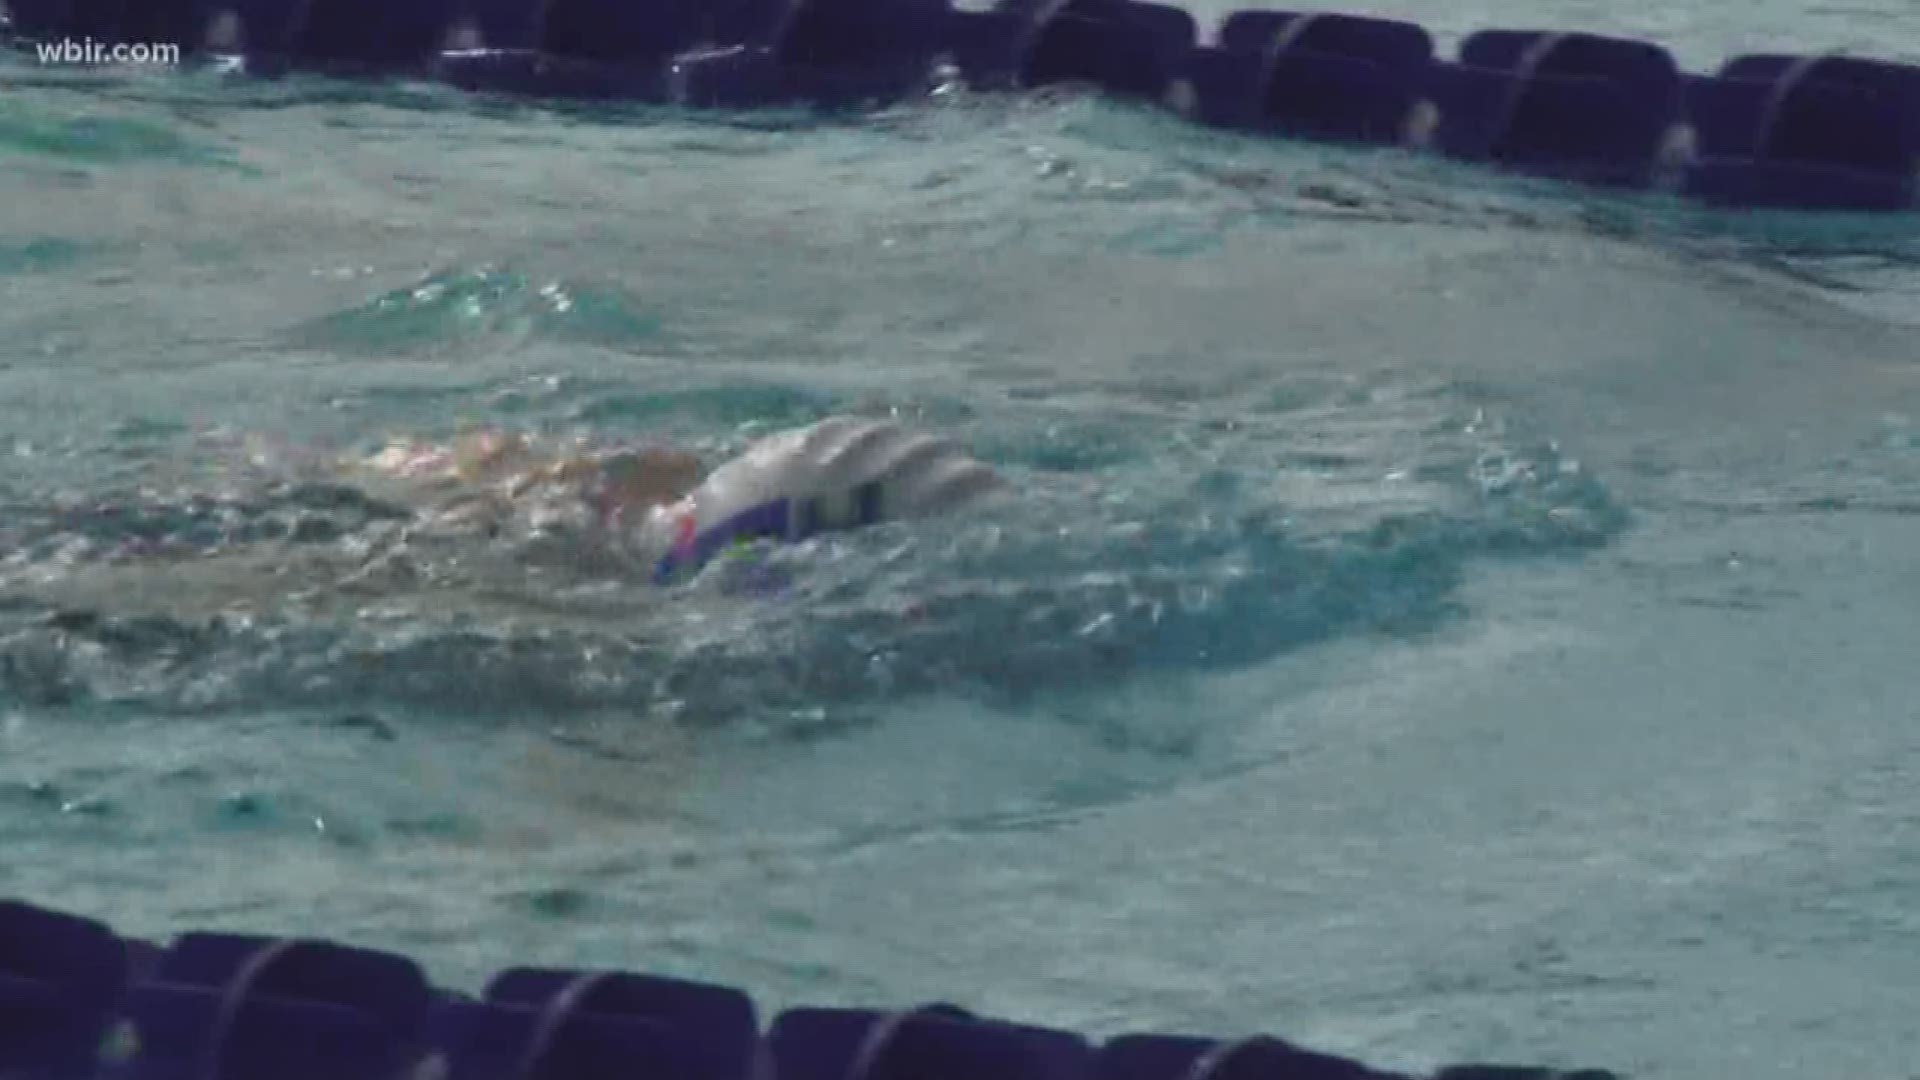 Young swimmers dove into the water at the Smoky Mountain Invitational swim meet.